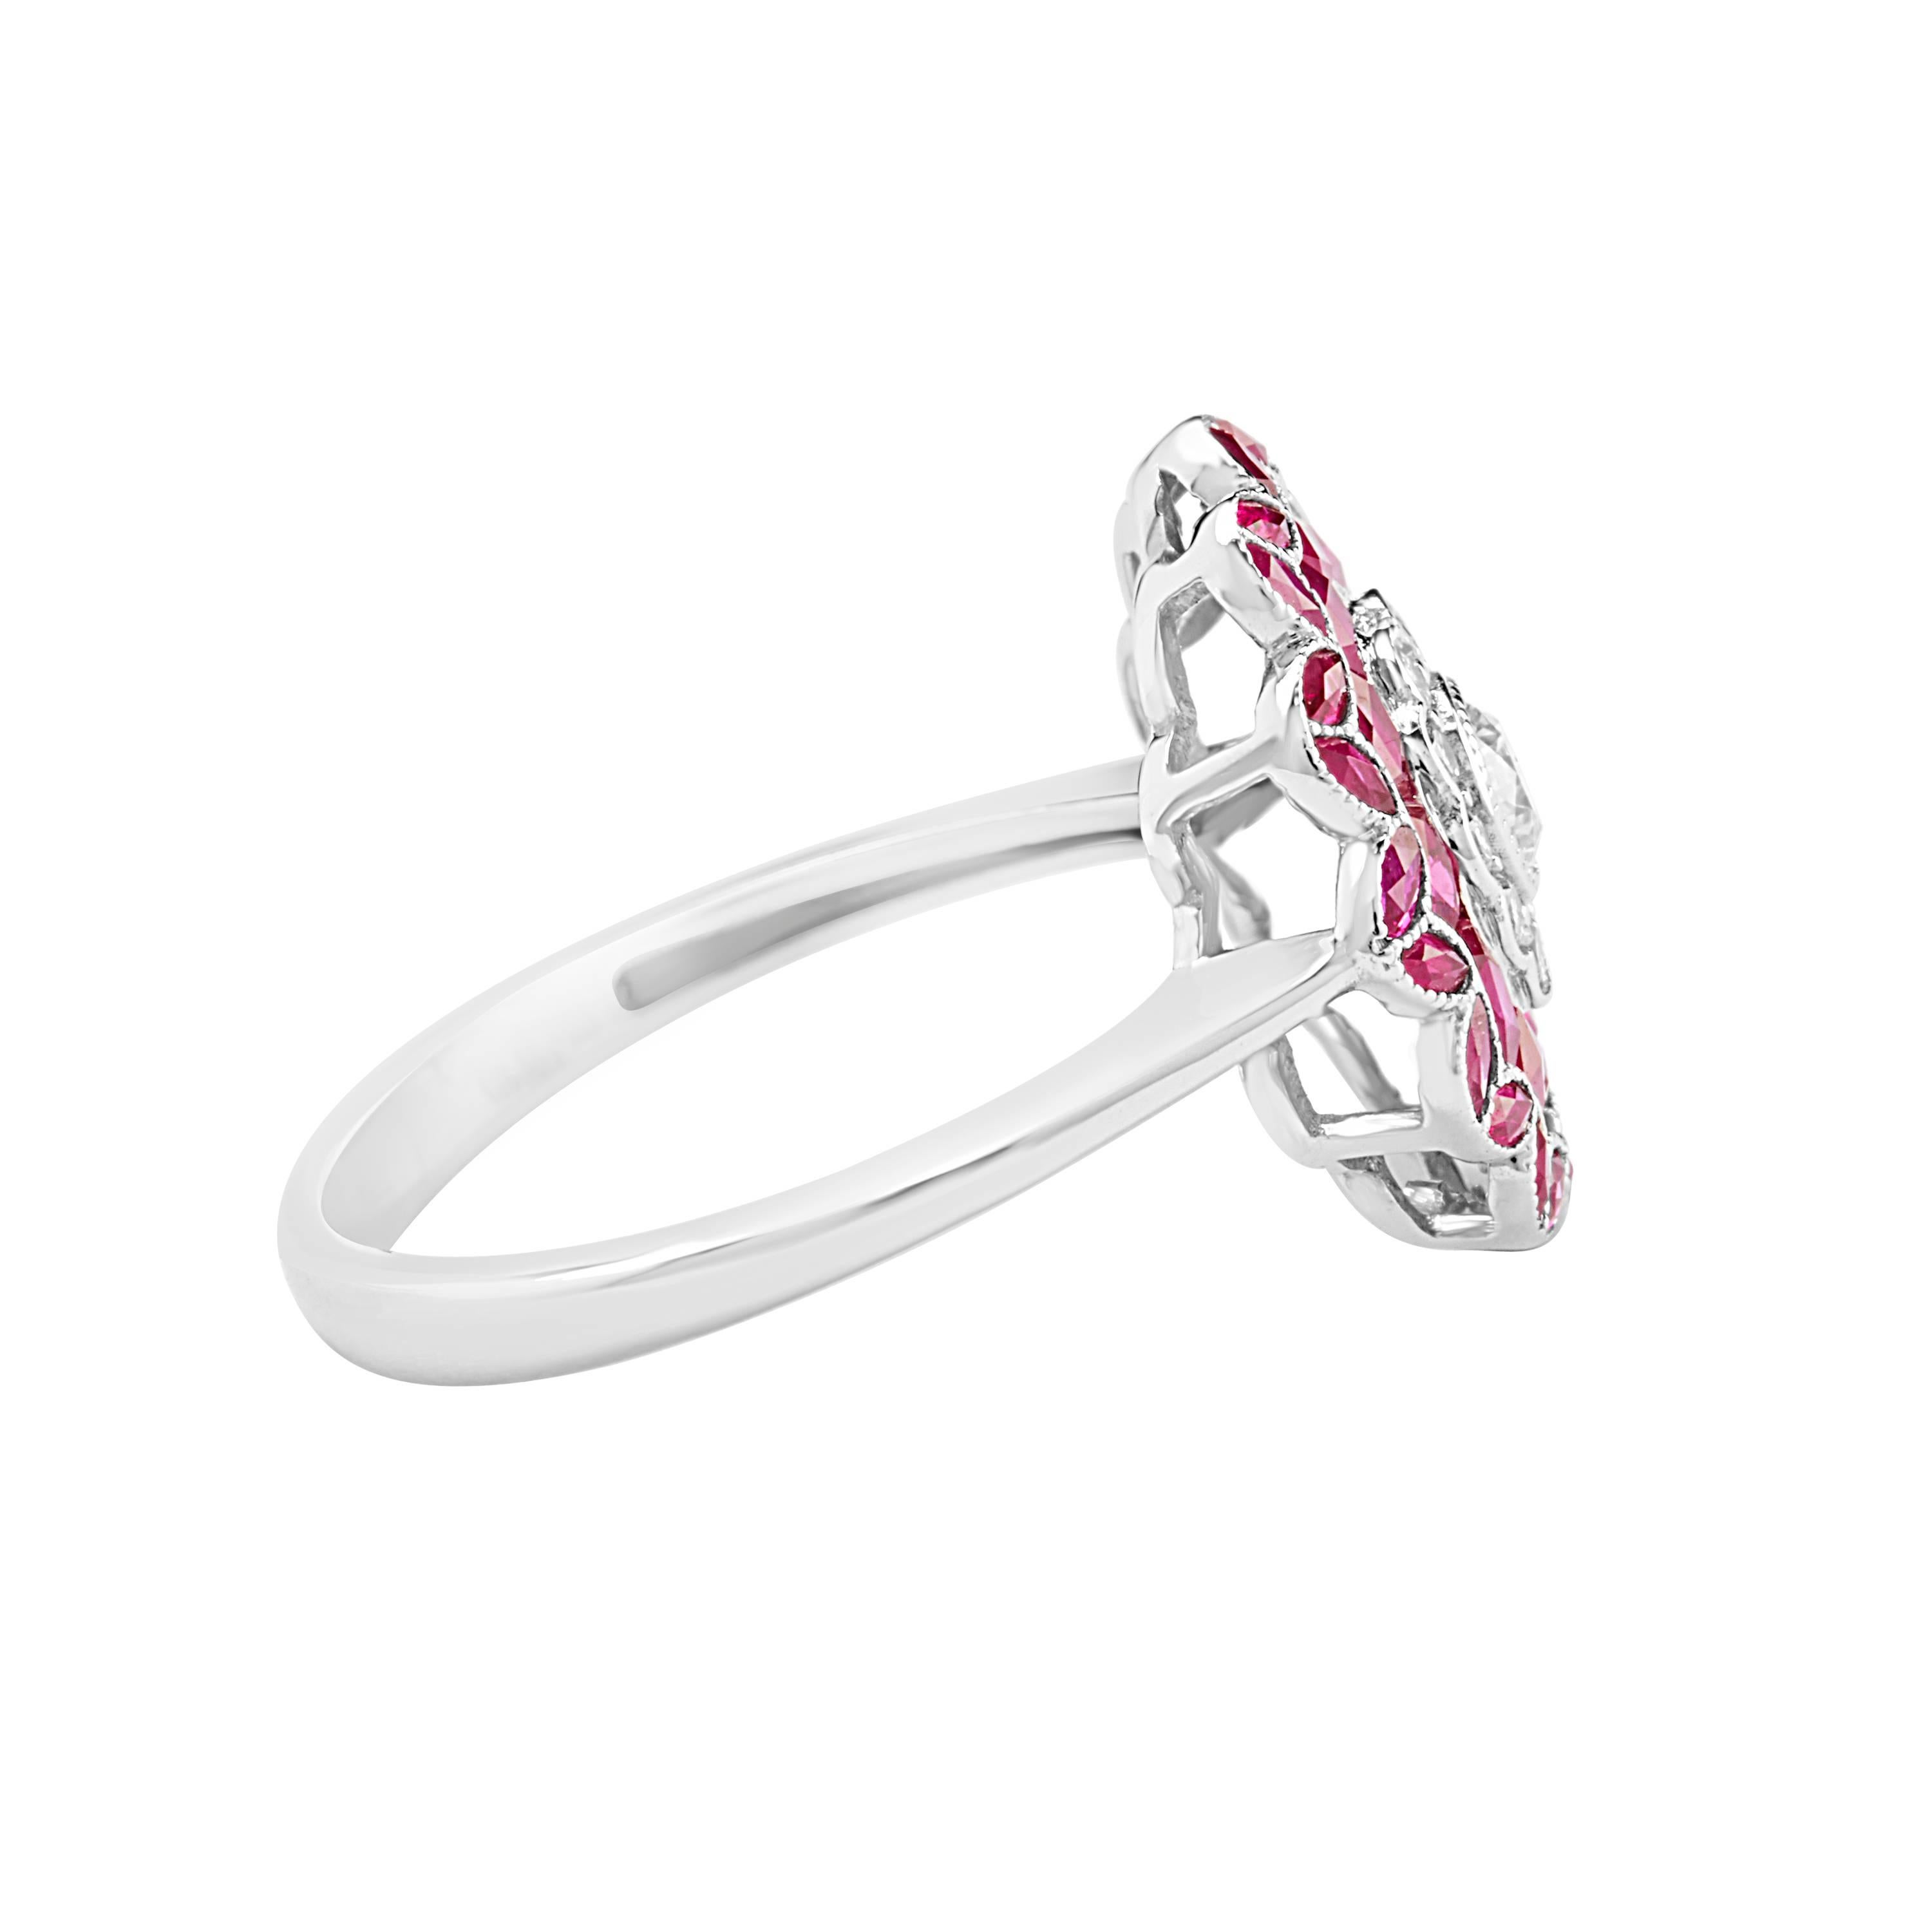 If you love flowers, This will be the perfect Ring for you.
The ring is carefully set with tiny ruby,s intricately cut to perfection.
It features 2.25 carats of ruby,s followed by  0.30 carts of diamonds .
This ring is adorable its a must have.